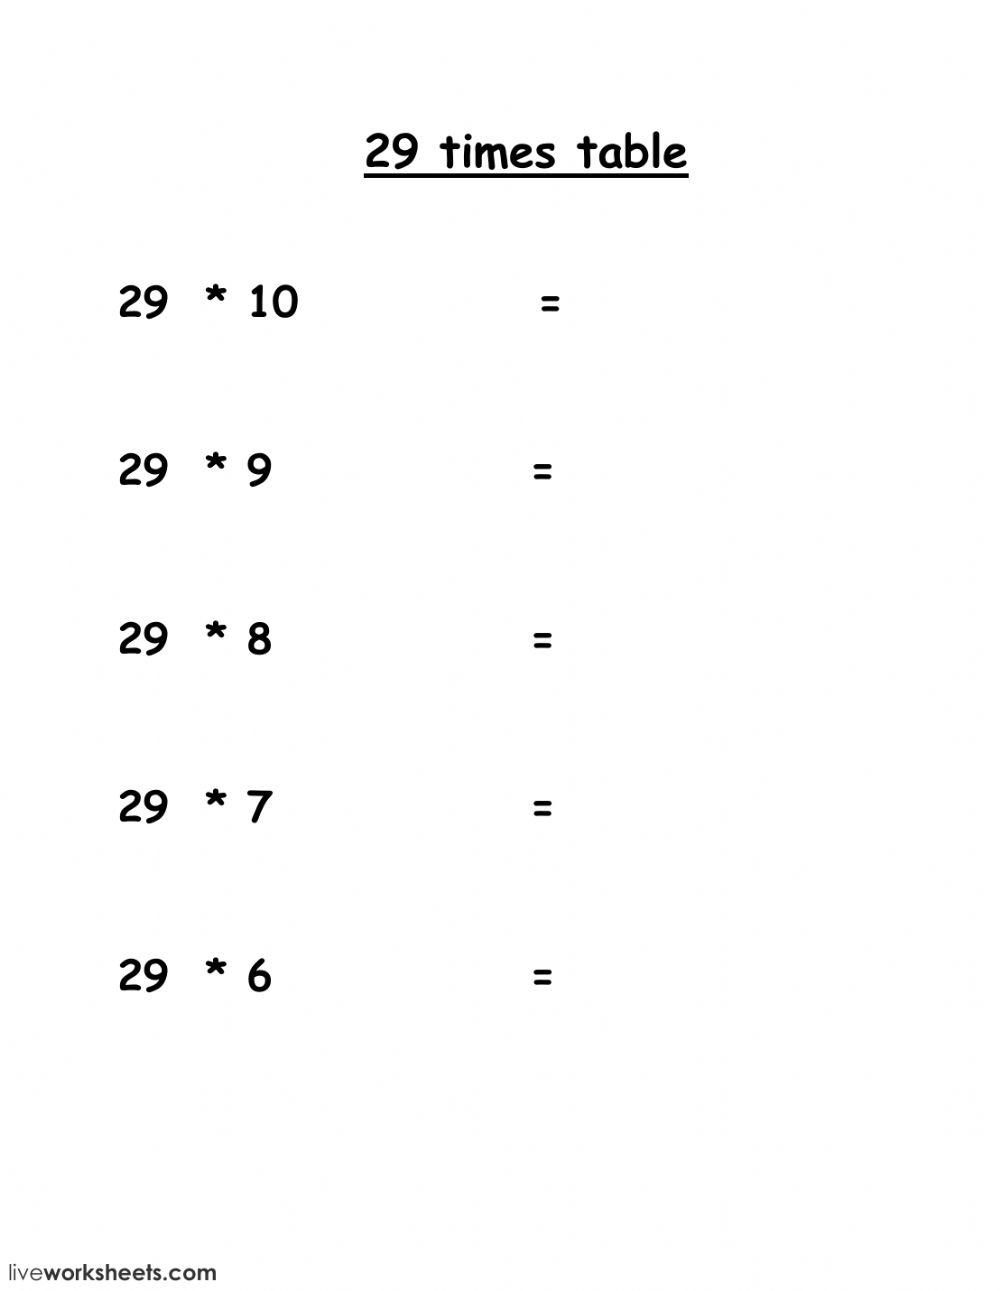 29 times table